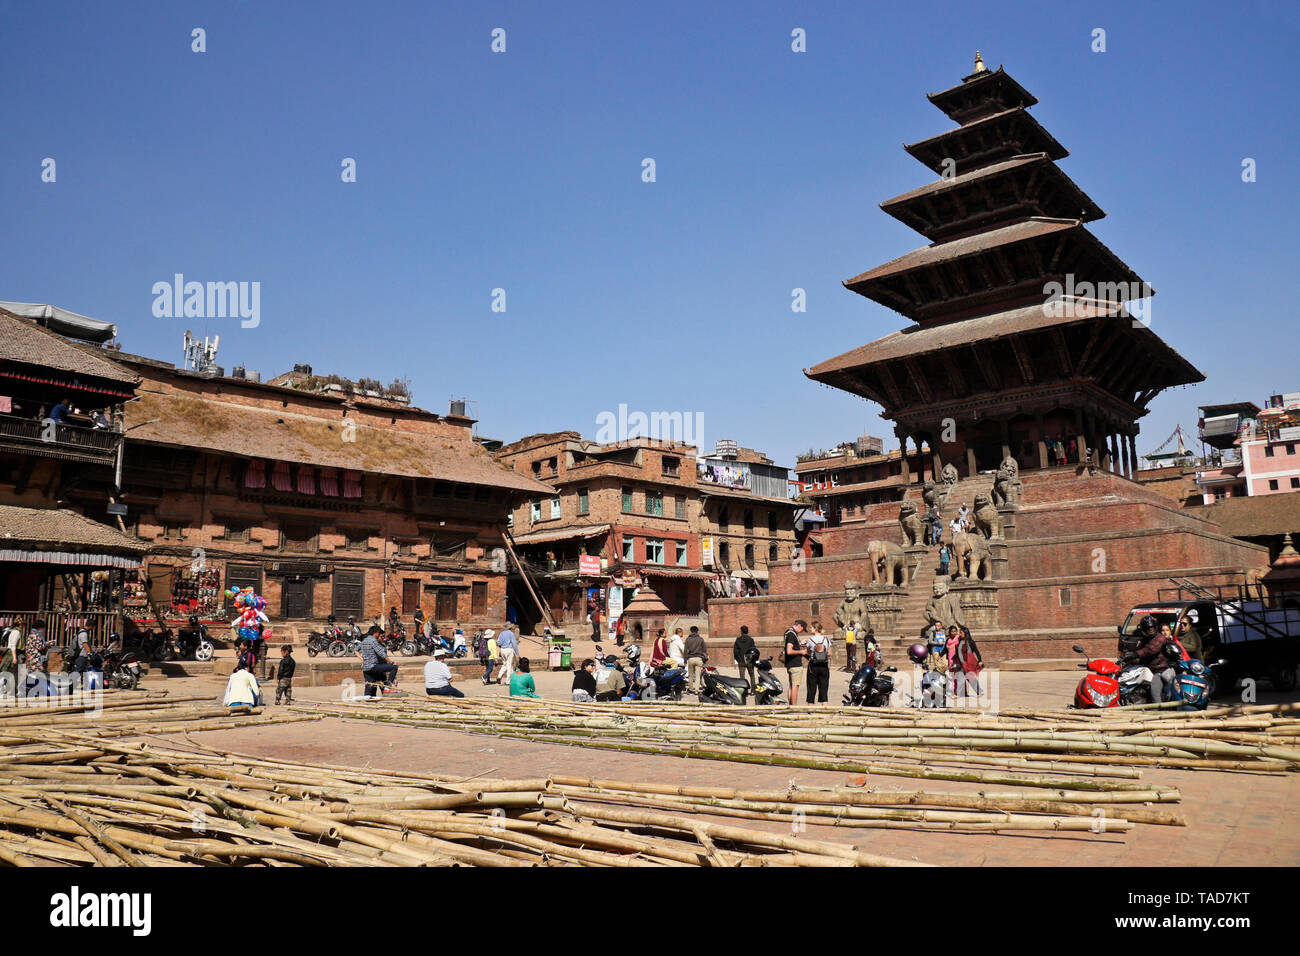 Bamboo scaffolding is piled in Taumadhi Tol, flanked by Newari buildings and the five-tiered Nyatapola pagoda temple, Bhaktapur, Kathmandu Valley, Nep Stock Photo